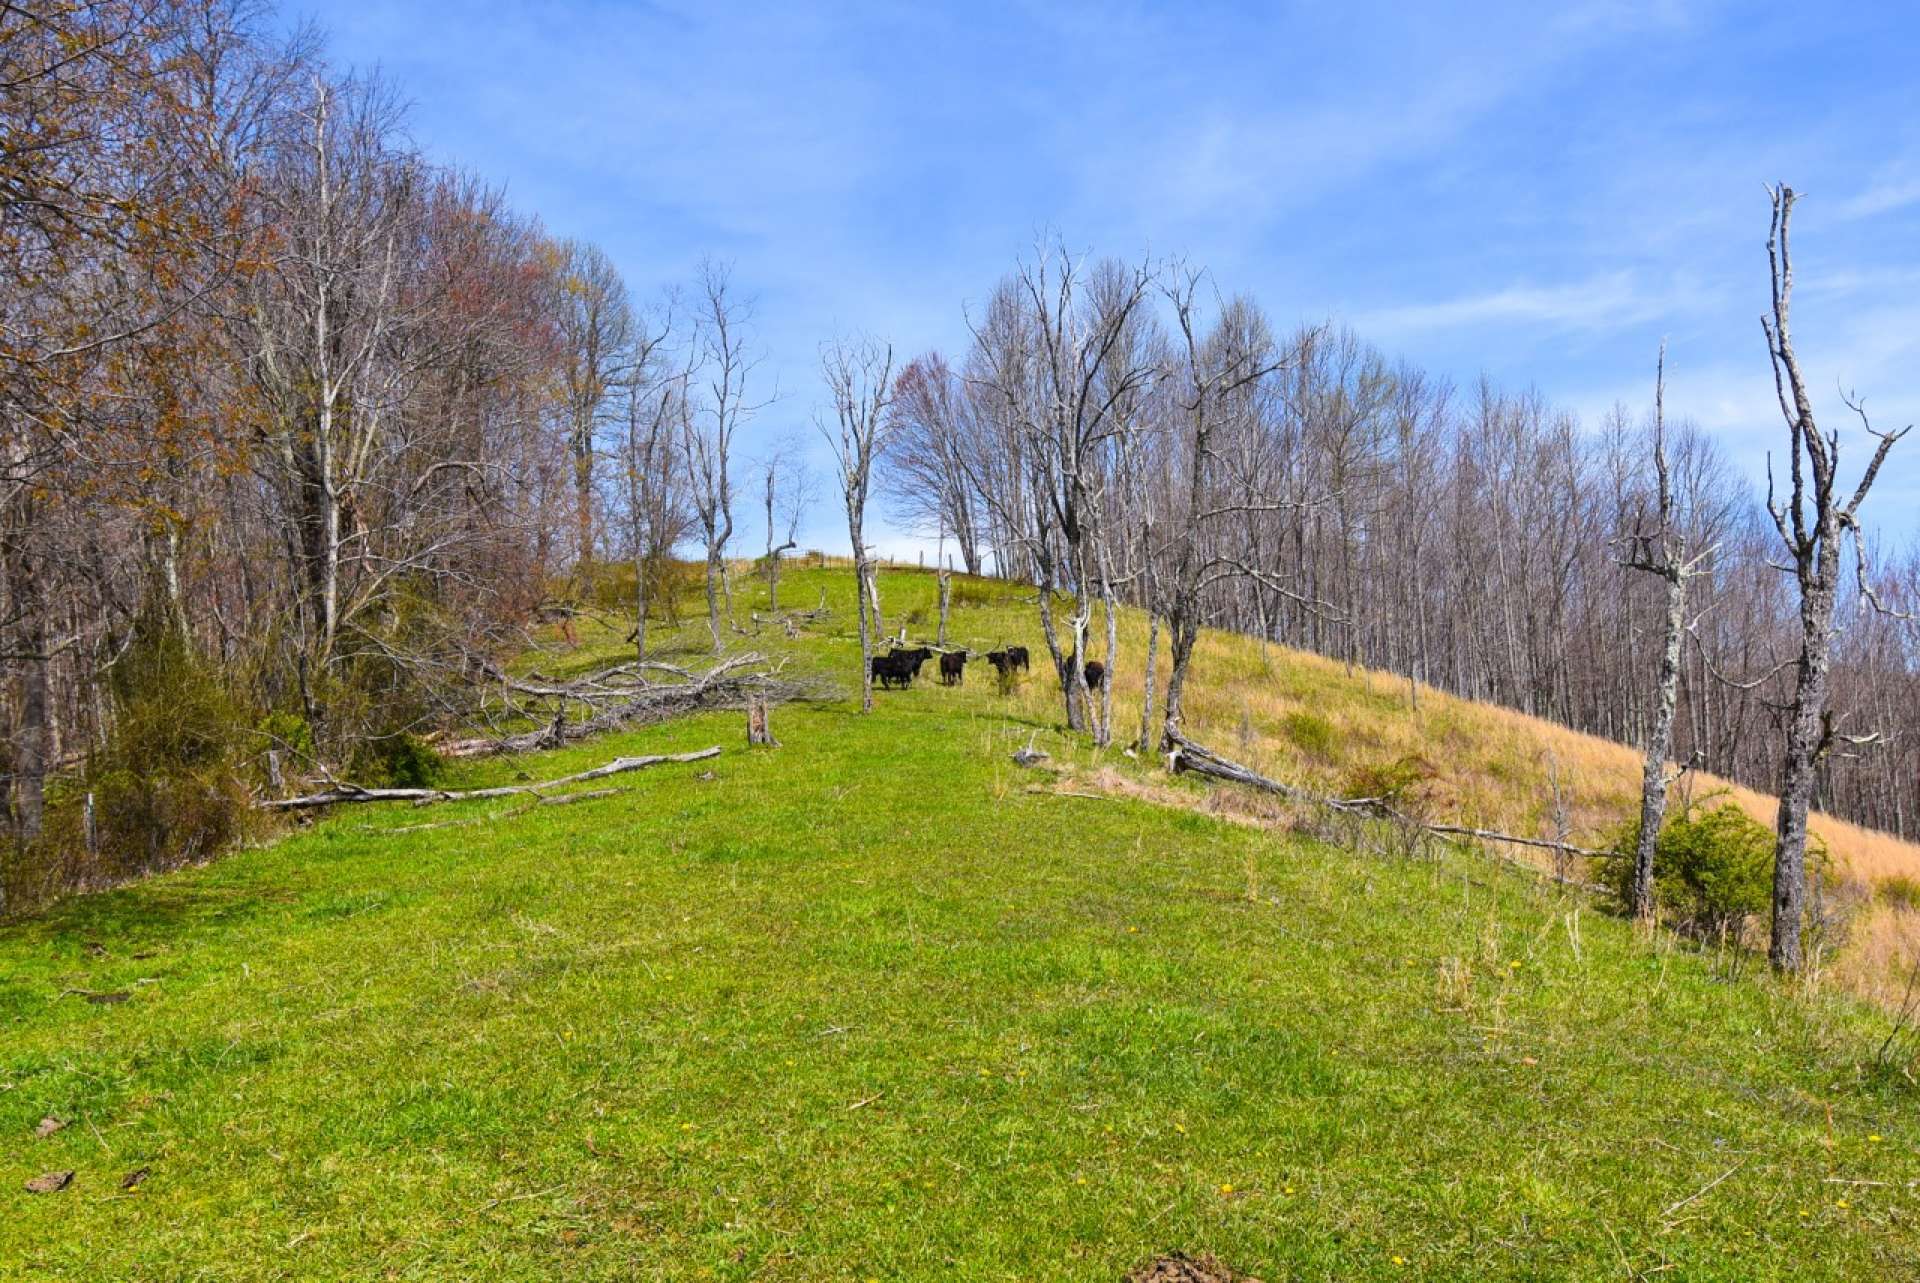 If you have a longing for a small mountain farm in the mountains, come take a look at this 31.86 acre tract  with close proximity to the town of Lansing and West Jefferson, NC.  The location is also convenient to the Grayson Highlands Park and the Virginia Creeper Trail.